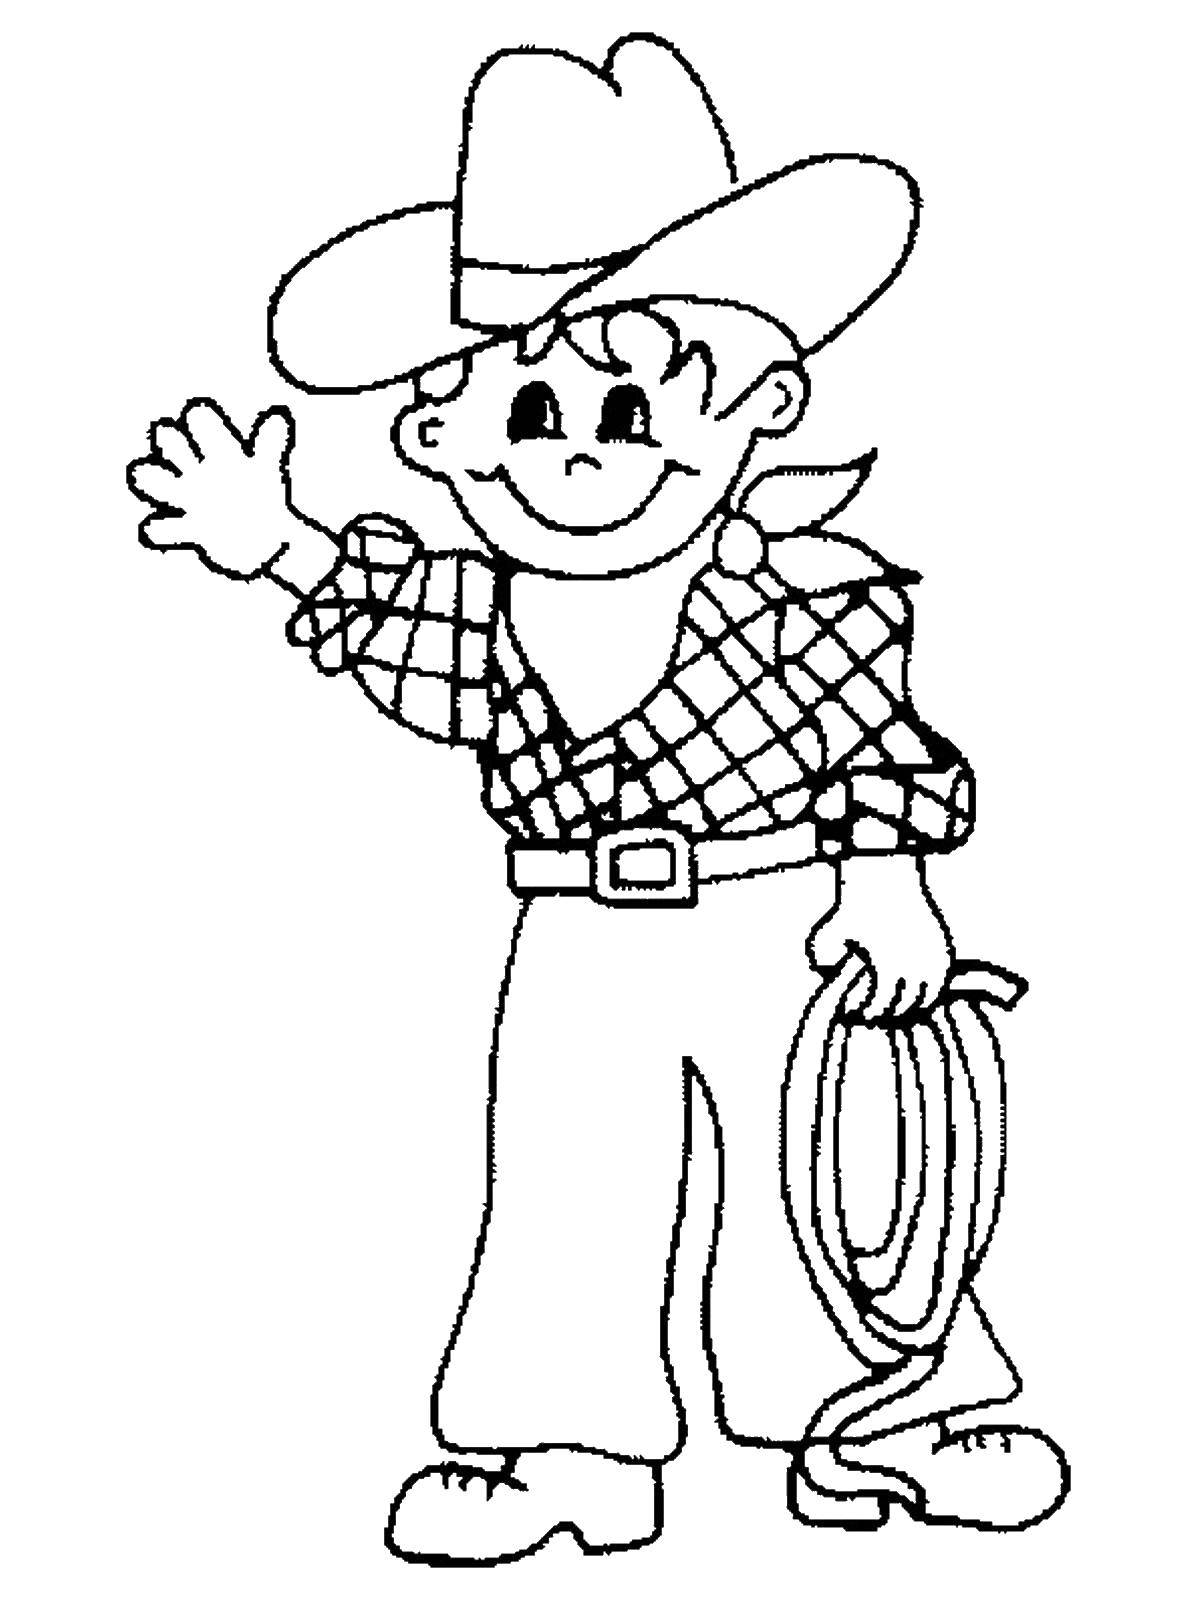 Coloring The cowboy. Category a profession. Tags:  a profession, a farmer, the cowboy.